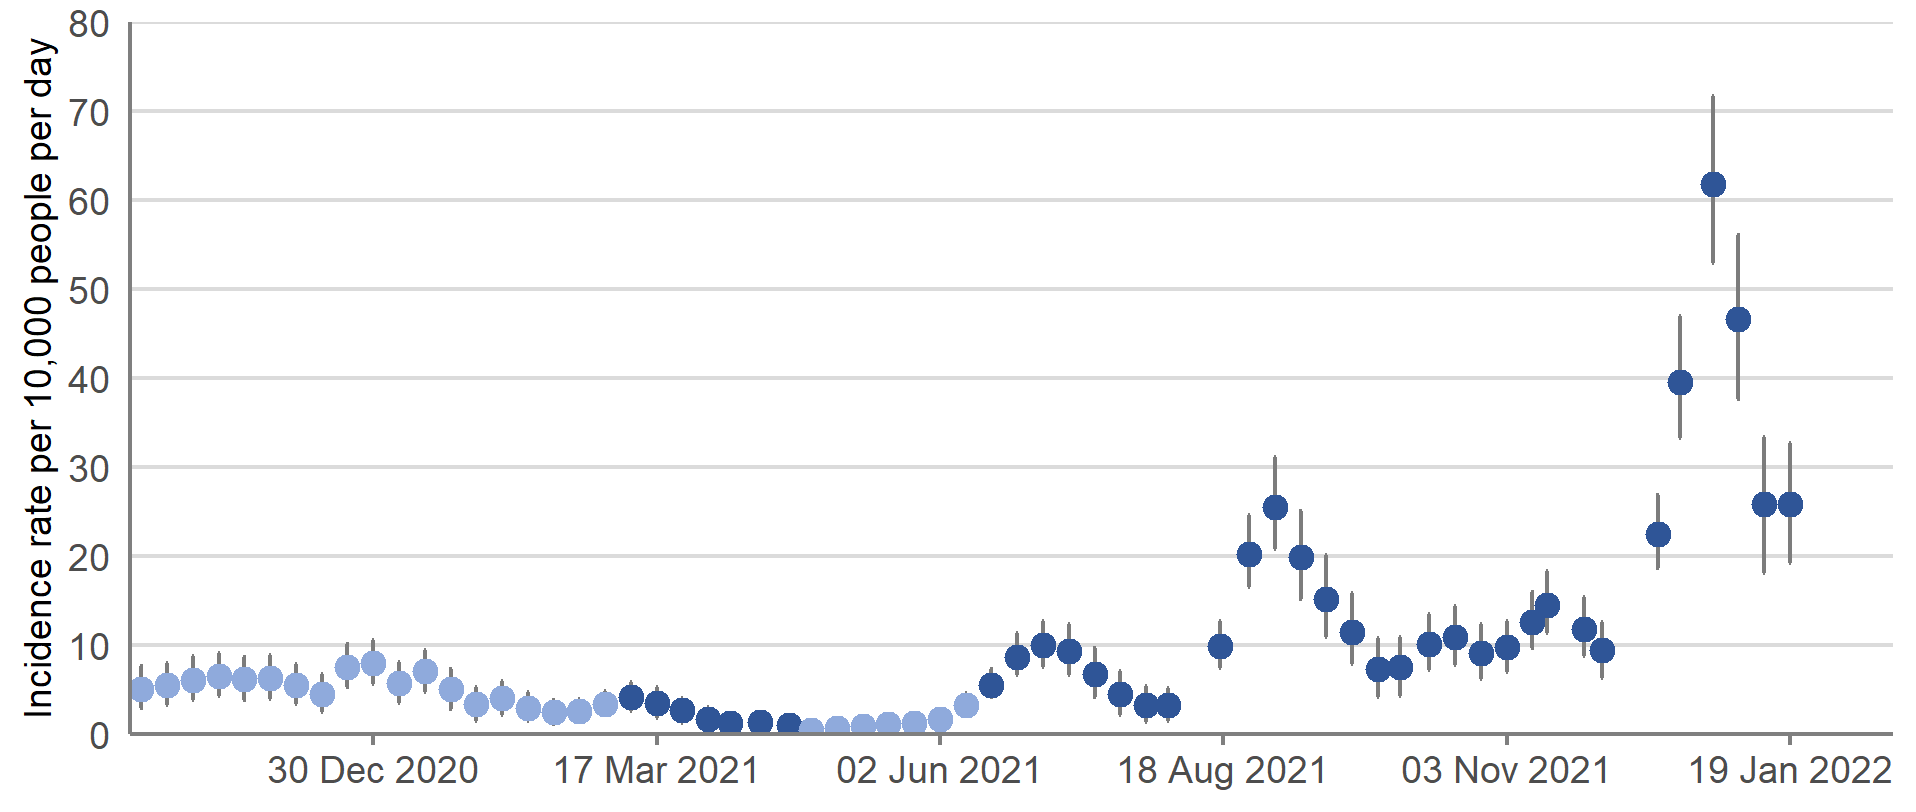 The official reported/indicative estimates of incidence rates in Scotland reached the highest peak since the start of the pandemic in the week 26 December 2021 to 1 January 2022. The incidence rate then decreased in two weeks to 19 January 2022, but the trend is uncertain in the most recent week.